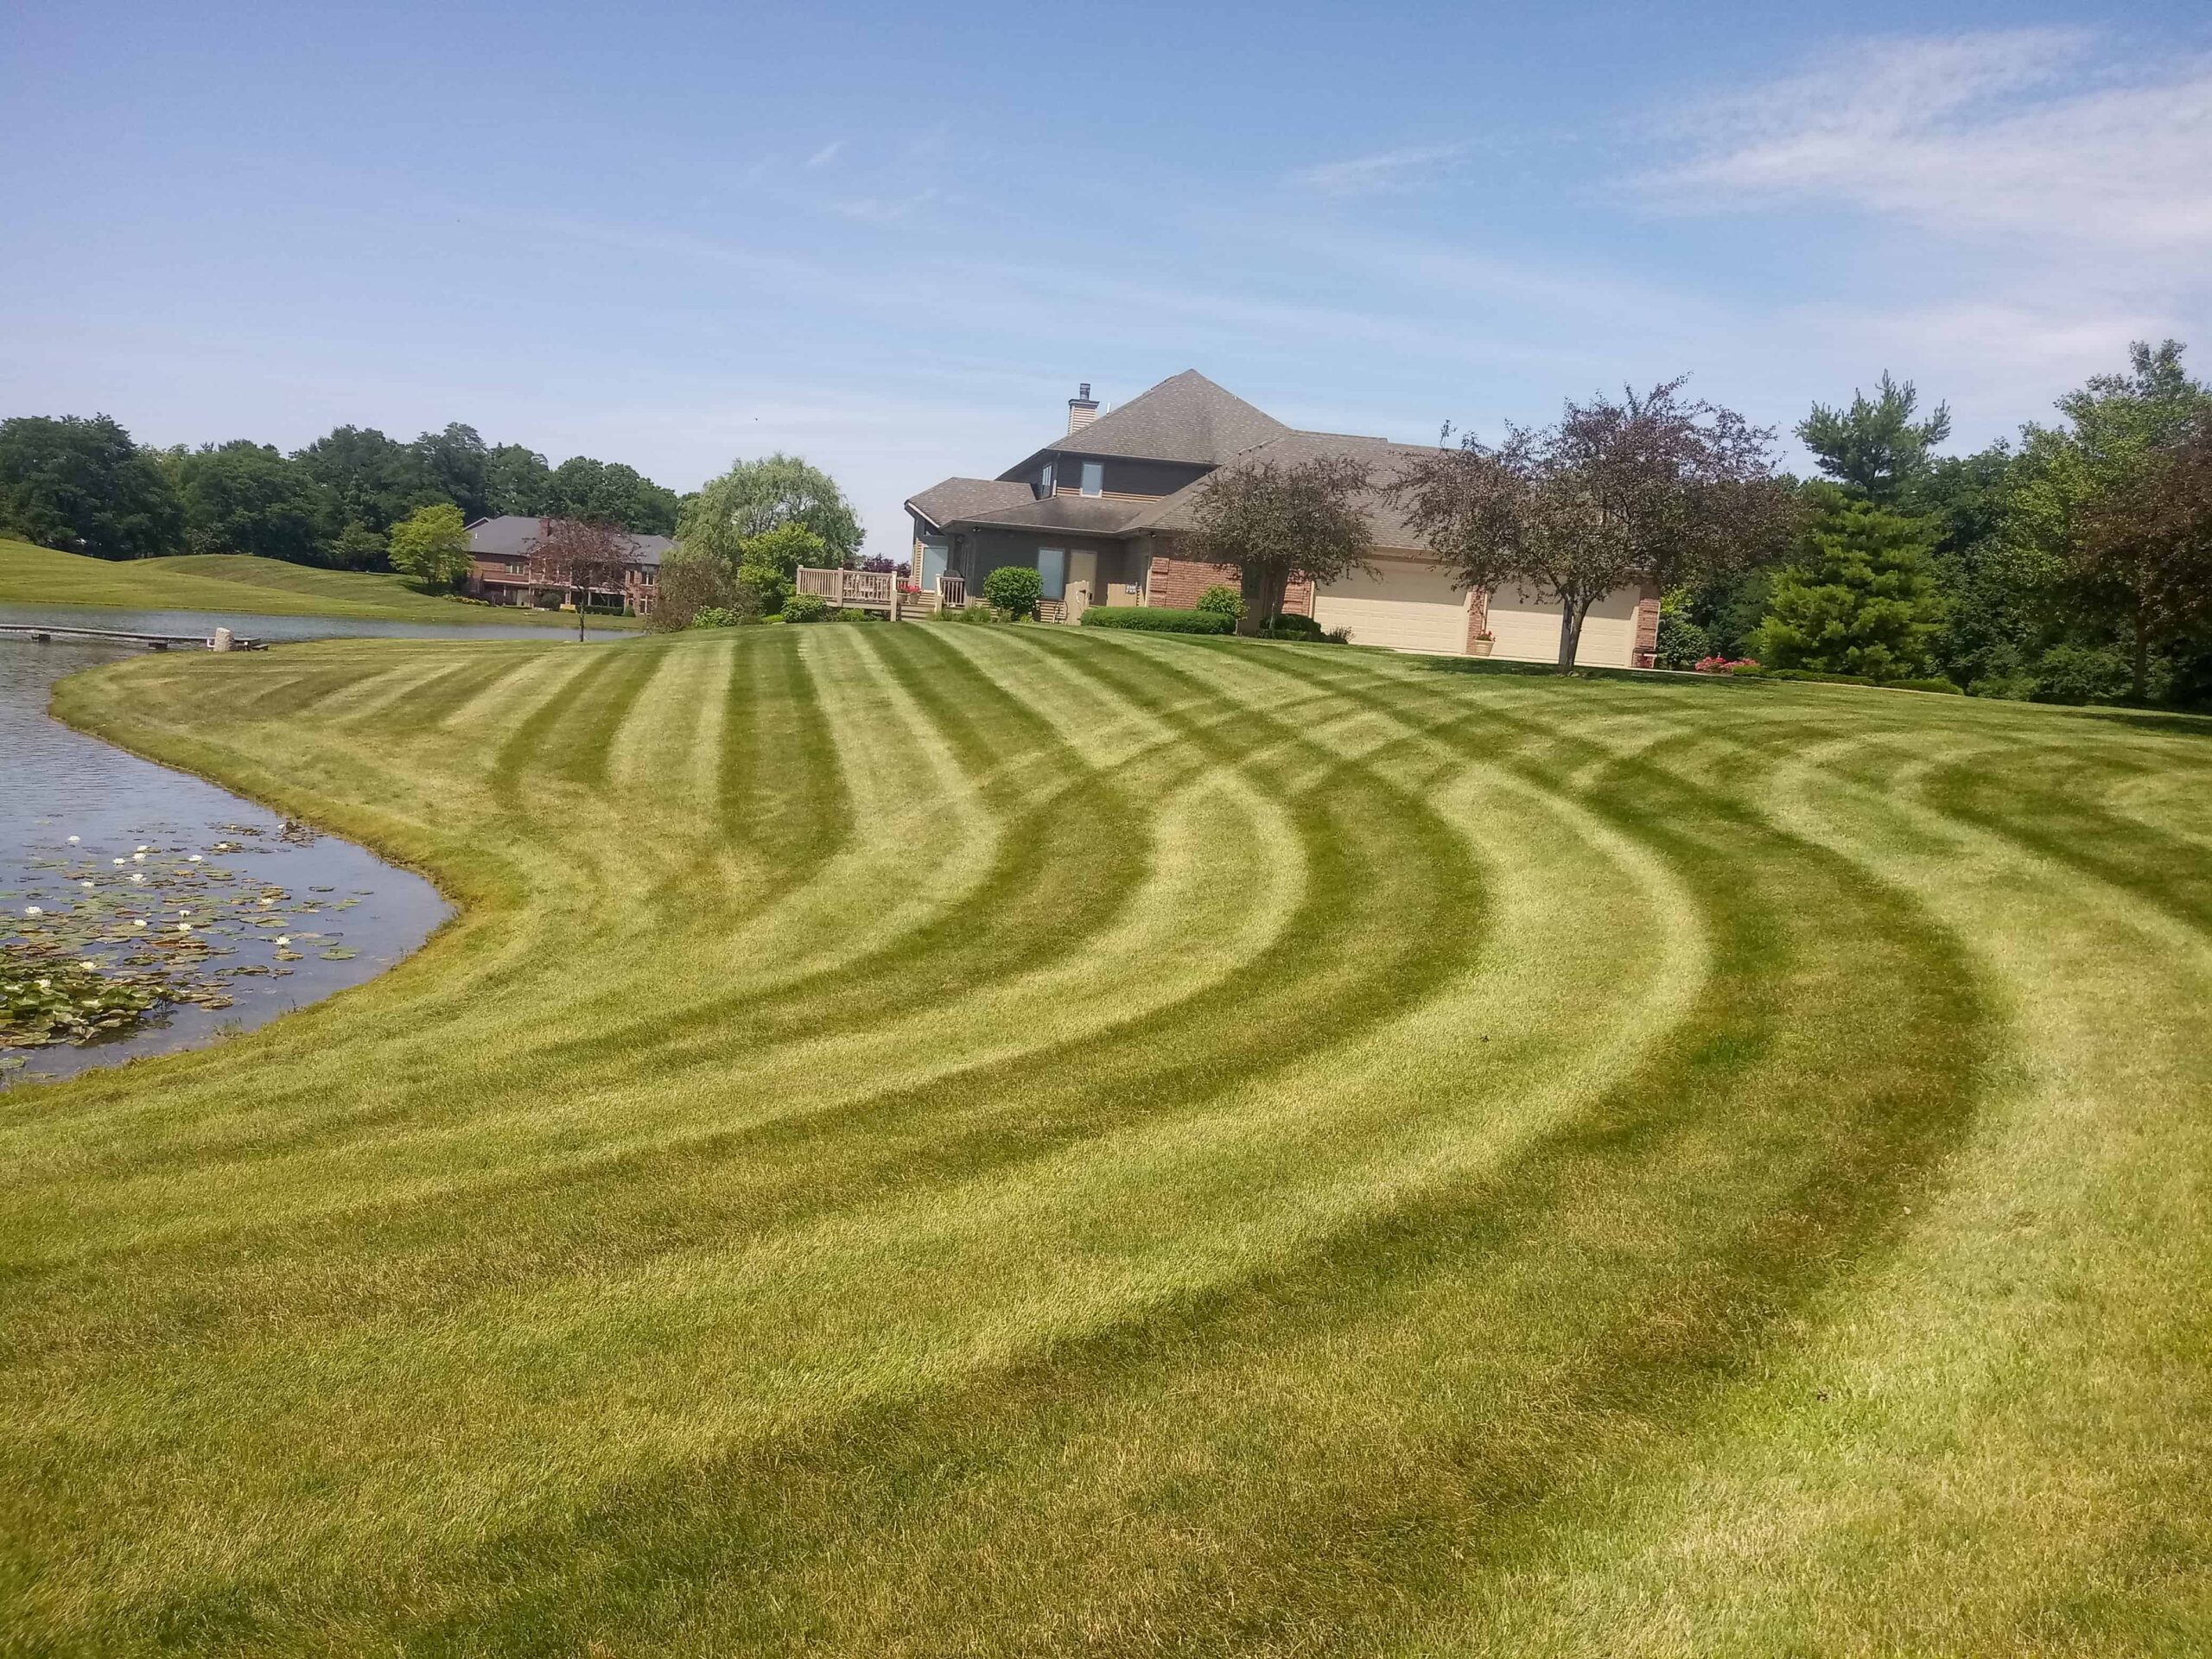 Lawn Care Service, Mowing, Greater Fort Wayne Area